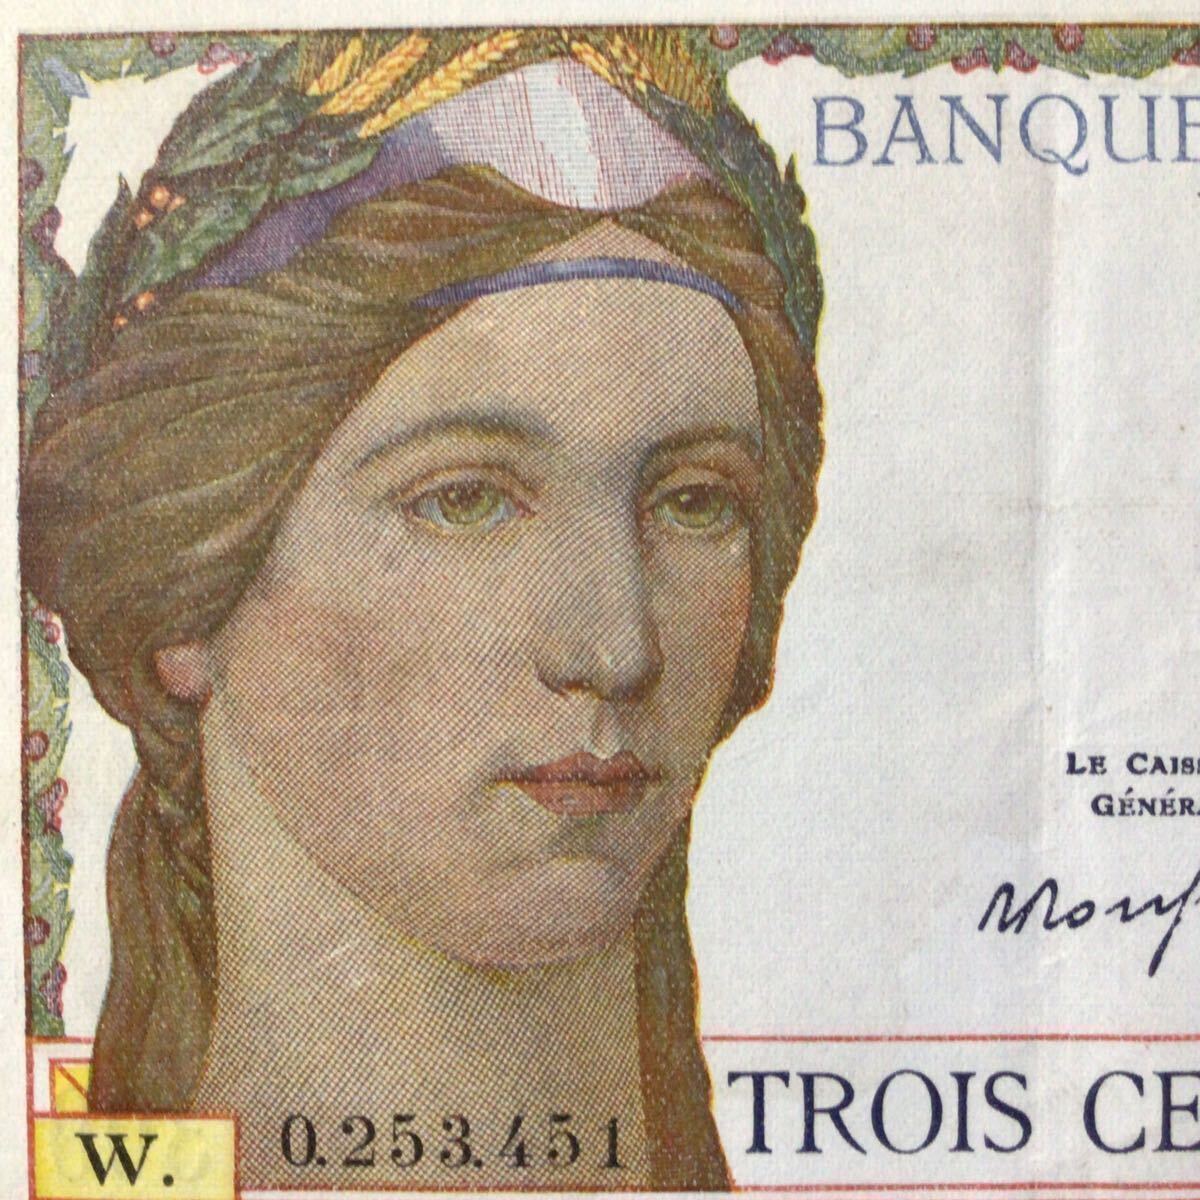 World Banknote Grading FRANCE《Banque de France》300 Francs〔Replacement〕【1938】『 PMG Grading About Uncirculated 50 NET』_画像4